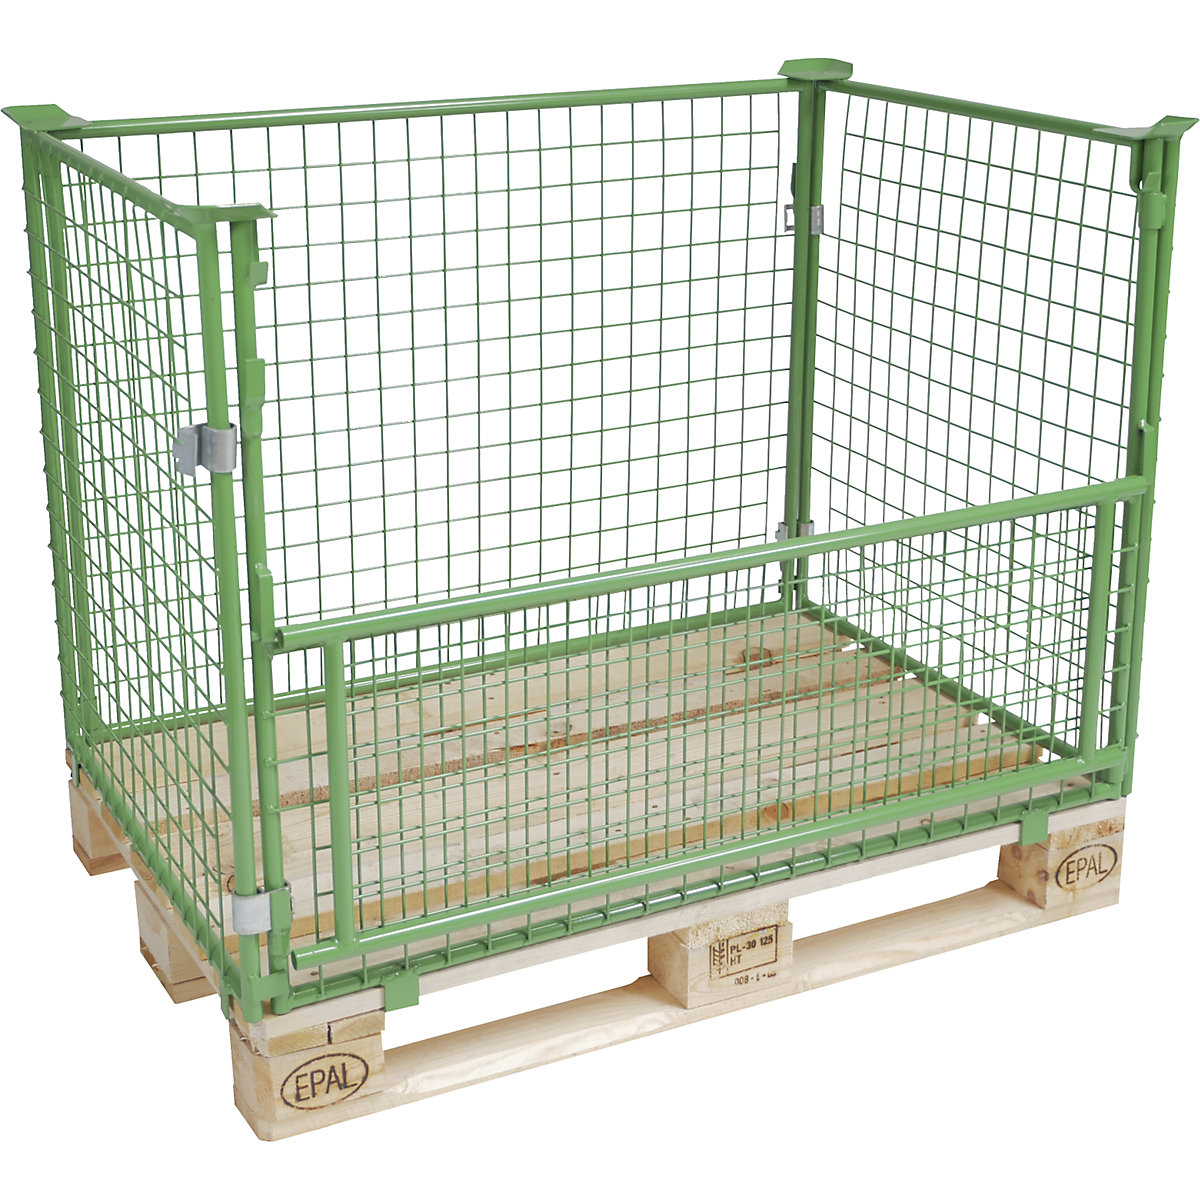 Mesh stacking frame for EUR pallet – eurokraft basic, with flap, mesh size 50 x 50 mm, height 1000 mm, green-3